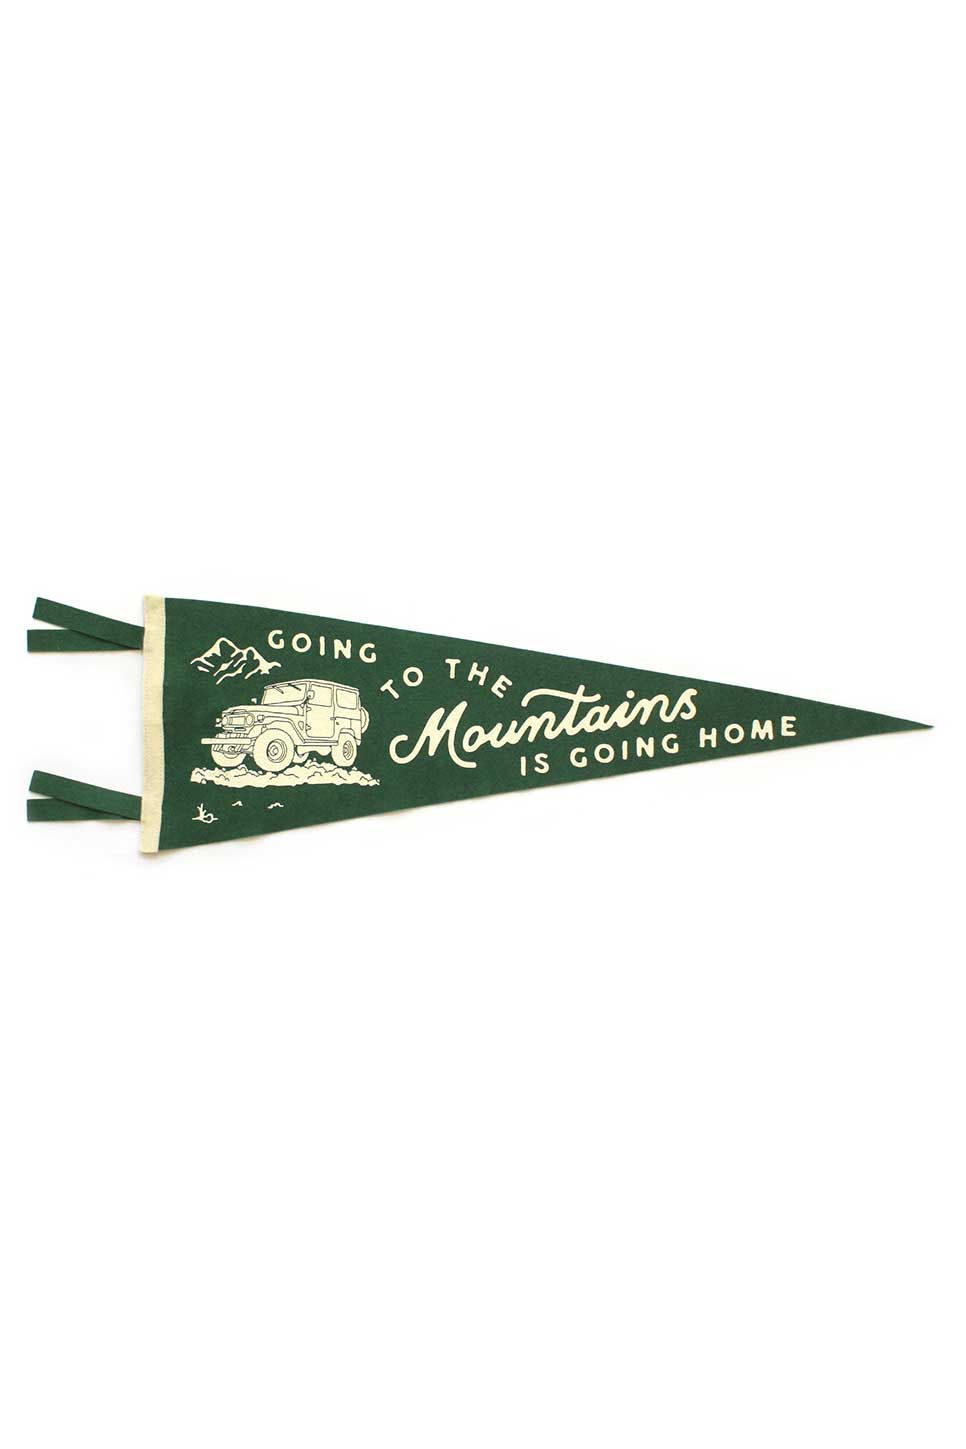 GOING TO THE MOUNTAINS IS GOING HOME PENNANT